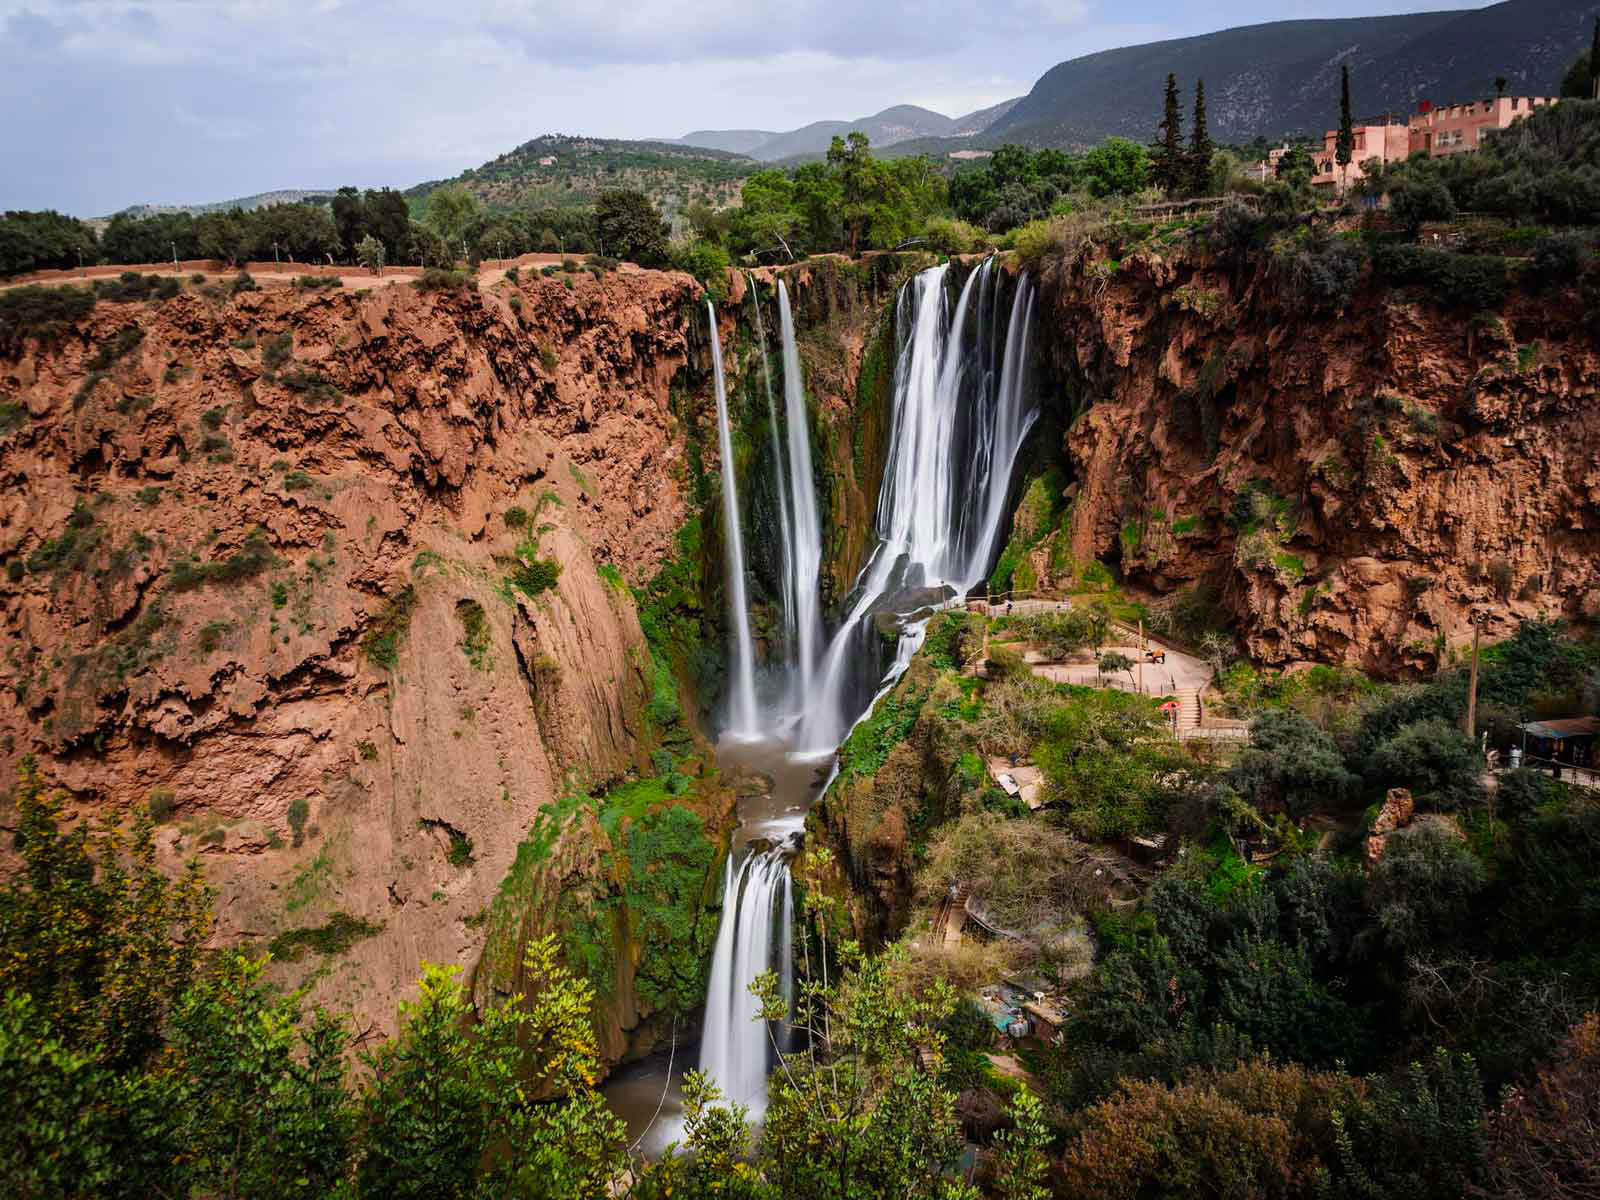 Full Day Trip To Ouzoud Waterfalls From Marrakech